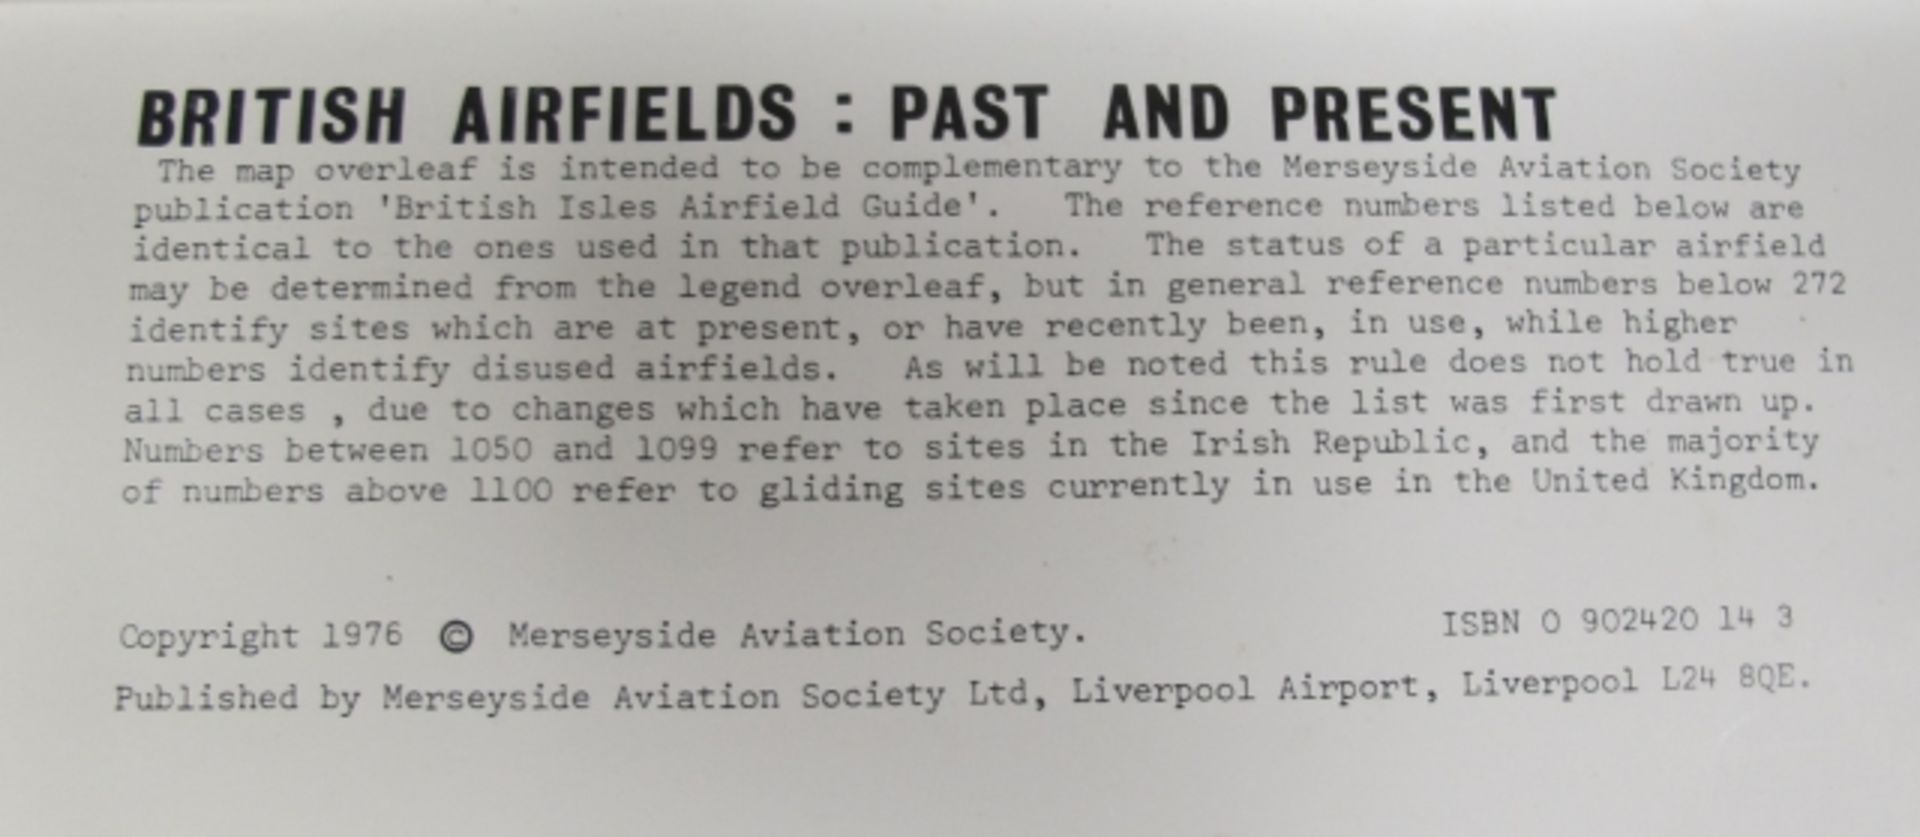 Map - British Airfields: Past and present copyright 1976 Merseyside Aviation Society, Aeromodeller - Image 8 of 18